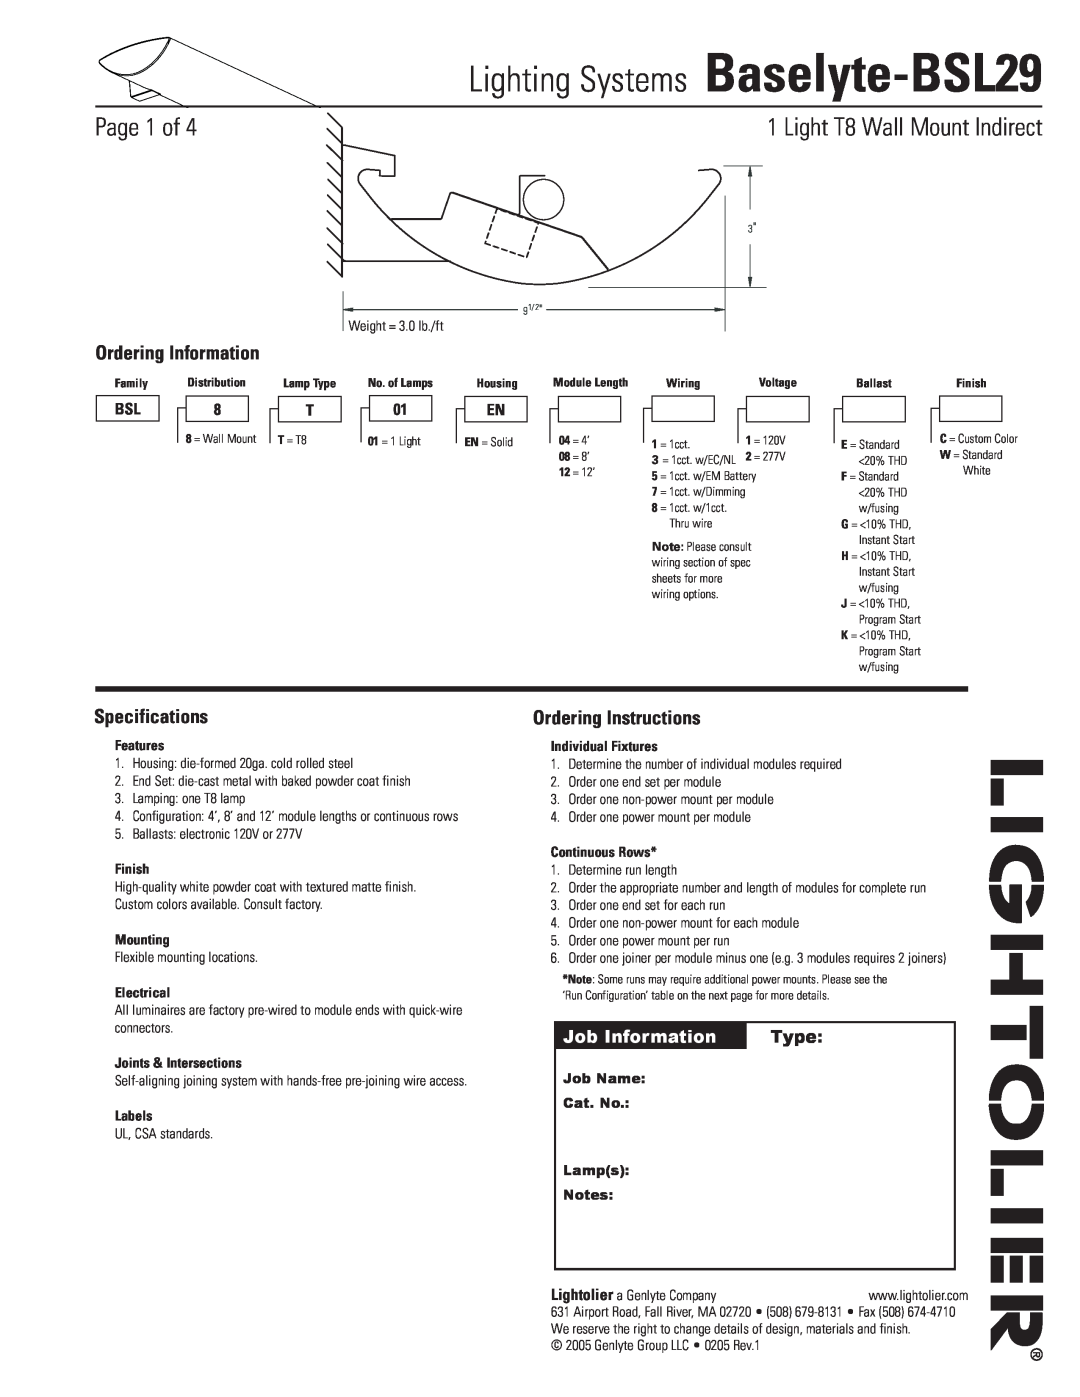 Lightolier specifications Lighting Systems Baselyte-BSL29, Page  of, Specifications, Ordering Instructions, Type 